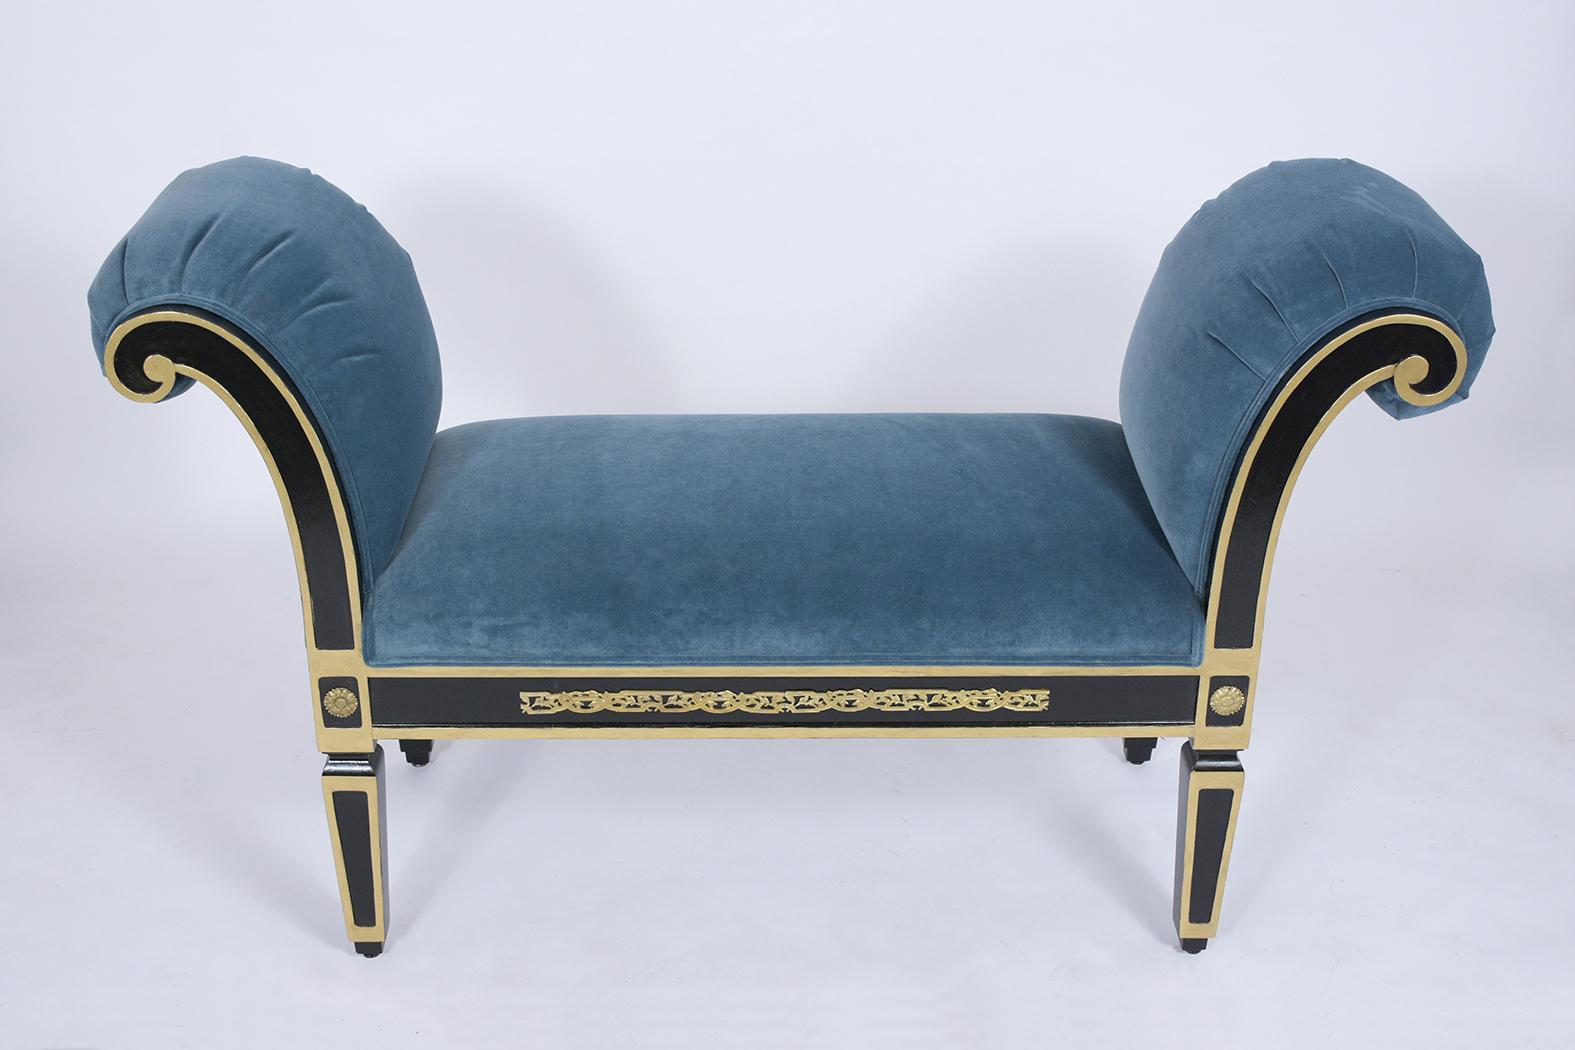 upholstered benches